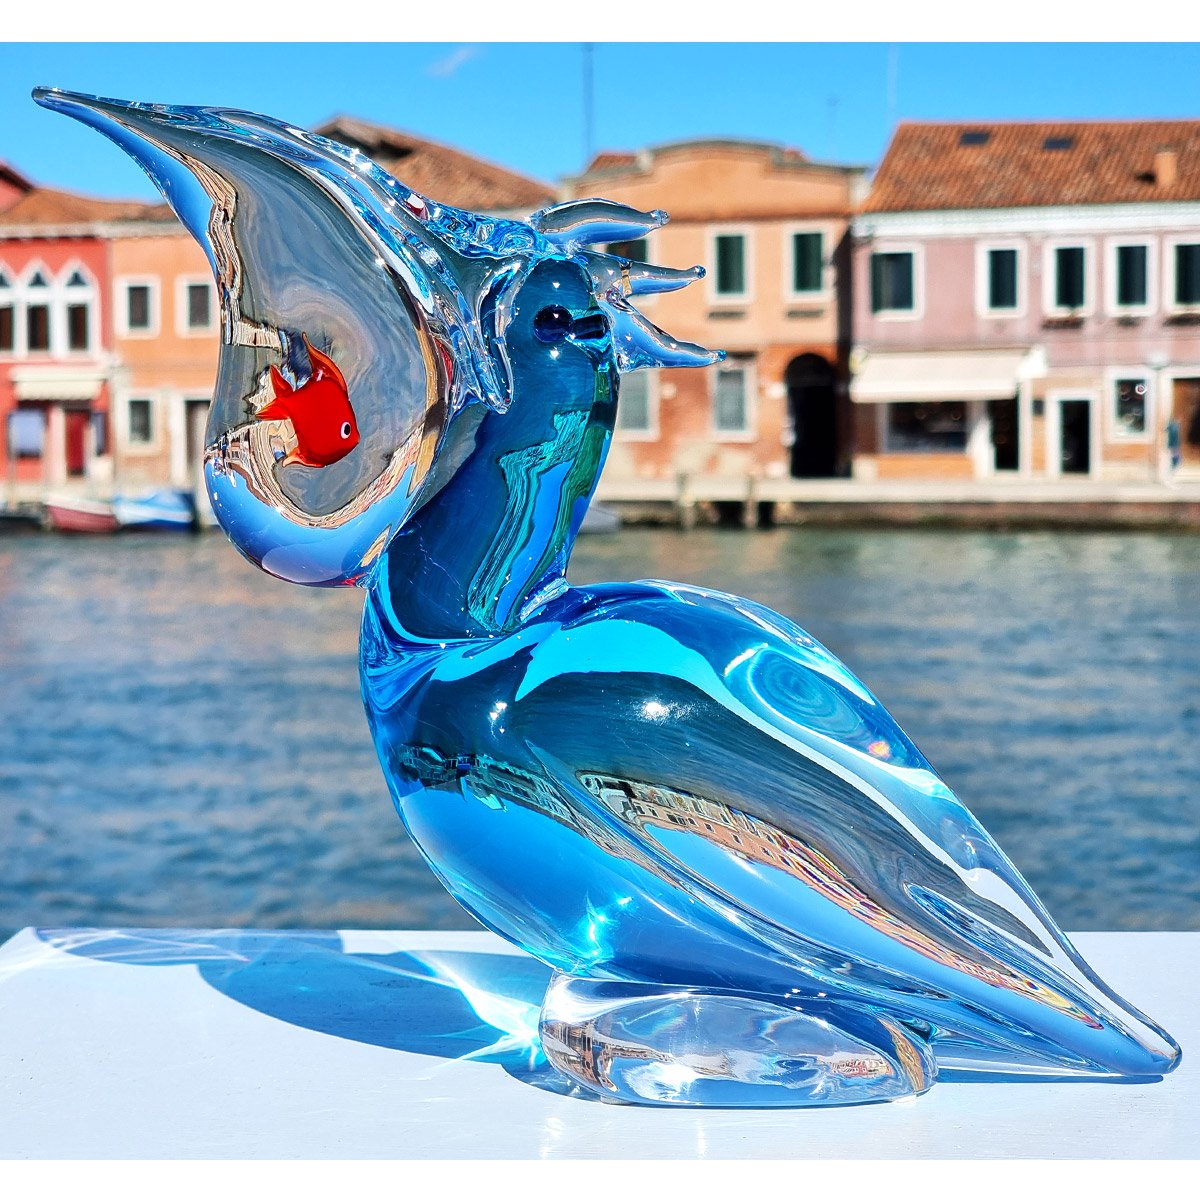 Sculptures & Figurines - Objects of Art glass - Various